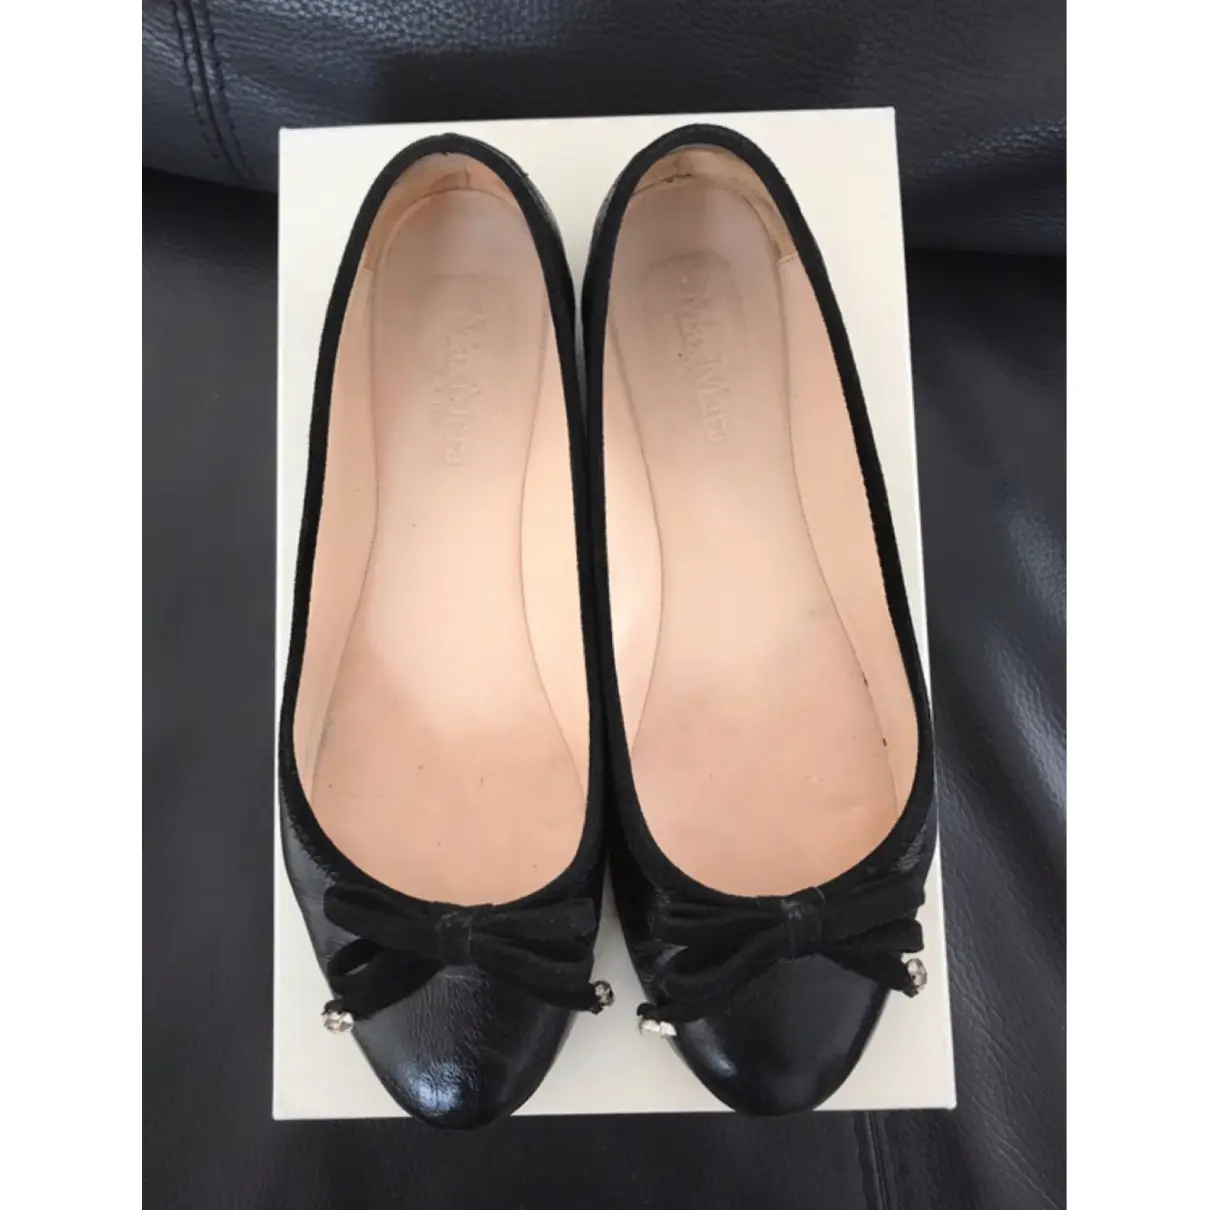 Buy Max Mara Patent leather ballet flats online